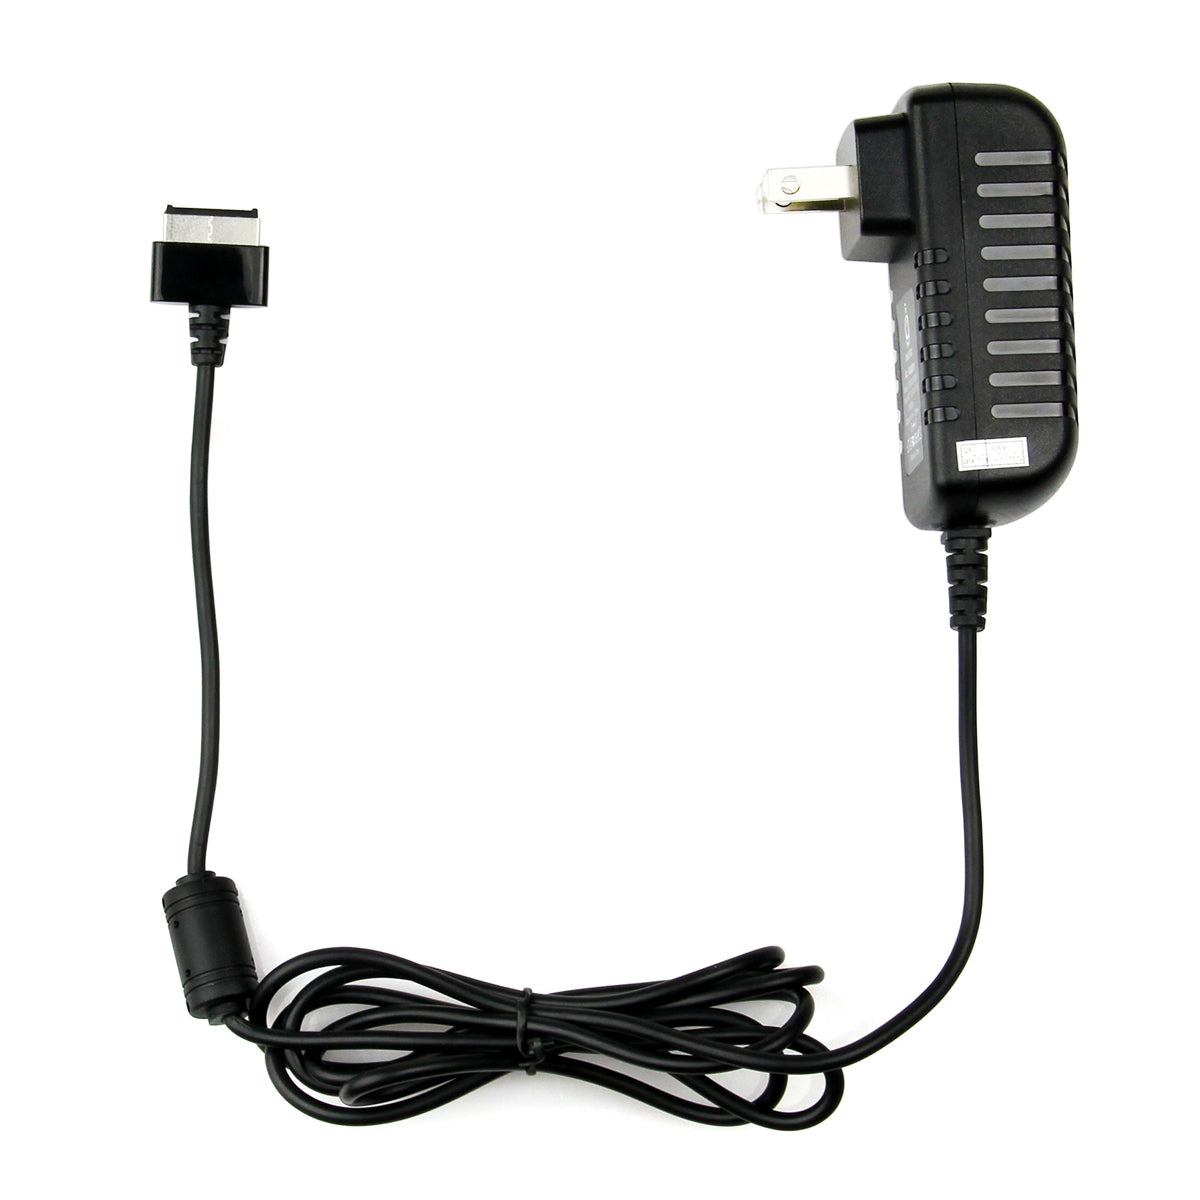 AC Adapter Charger for ASUS TF101 A1 Tablet.